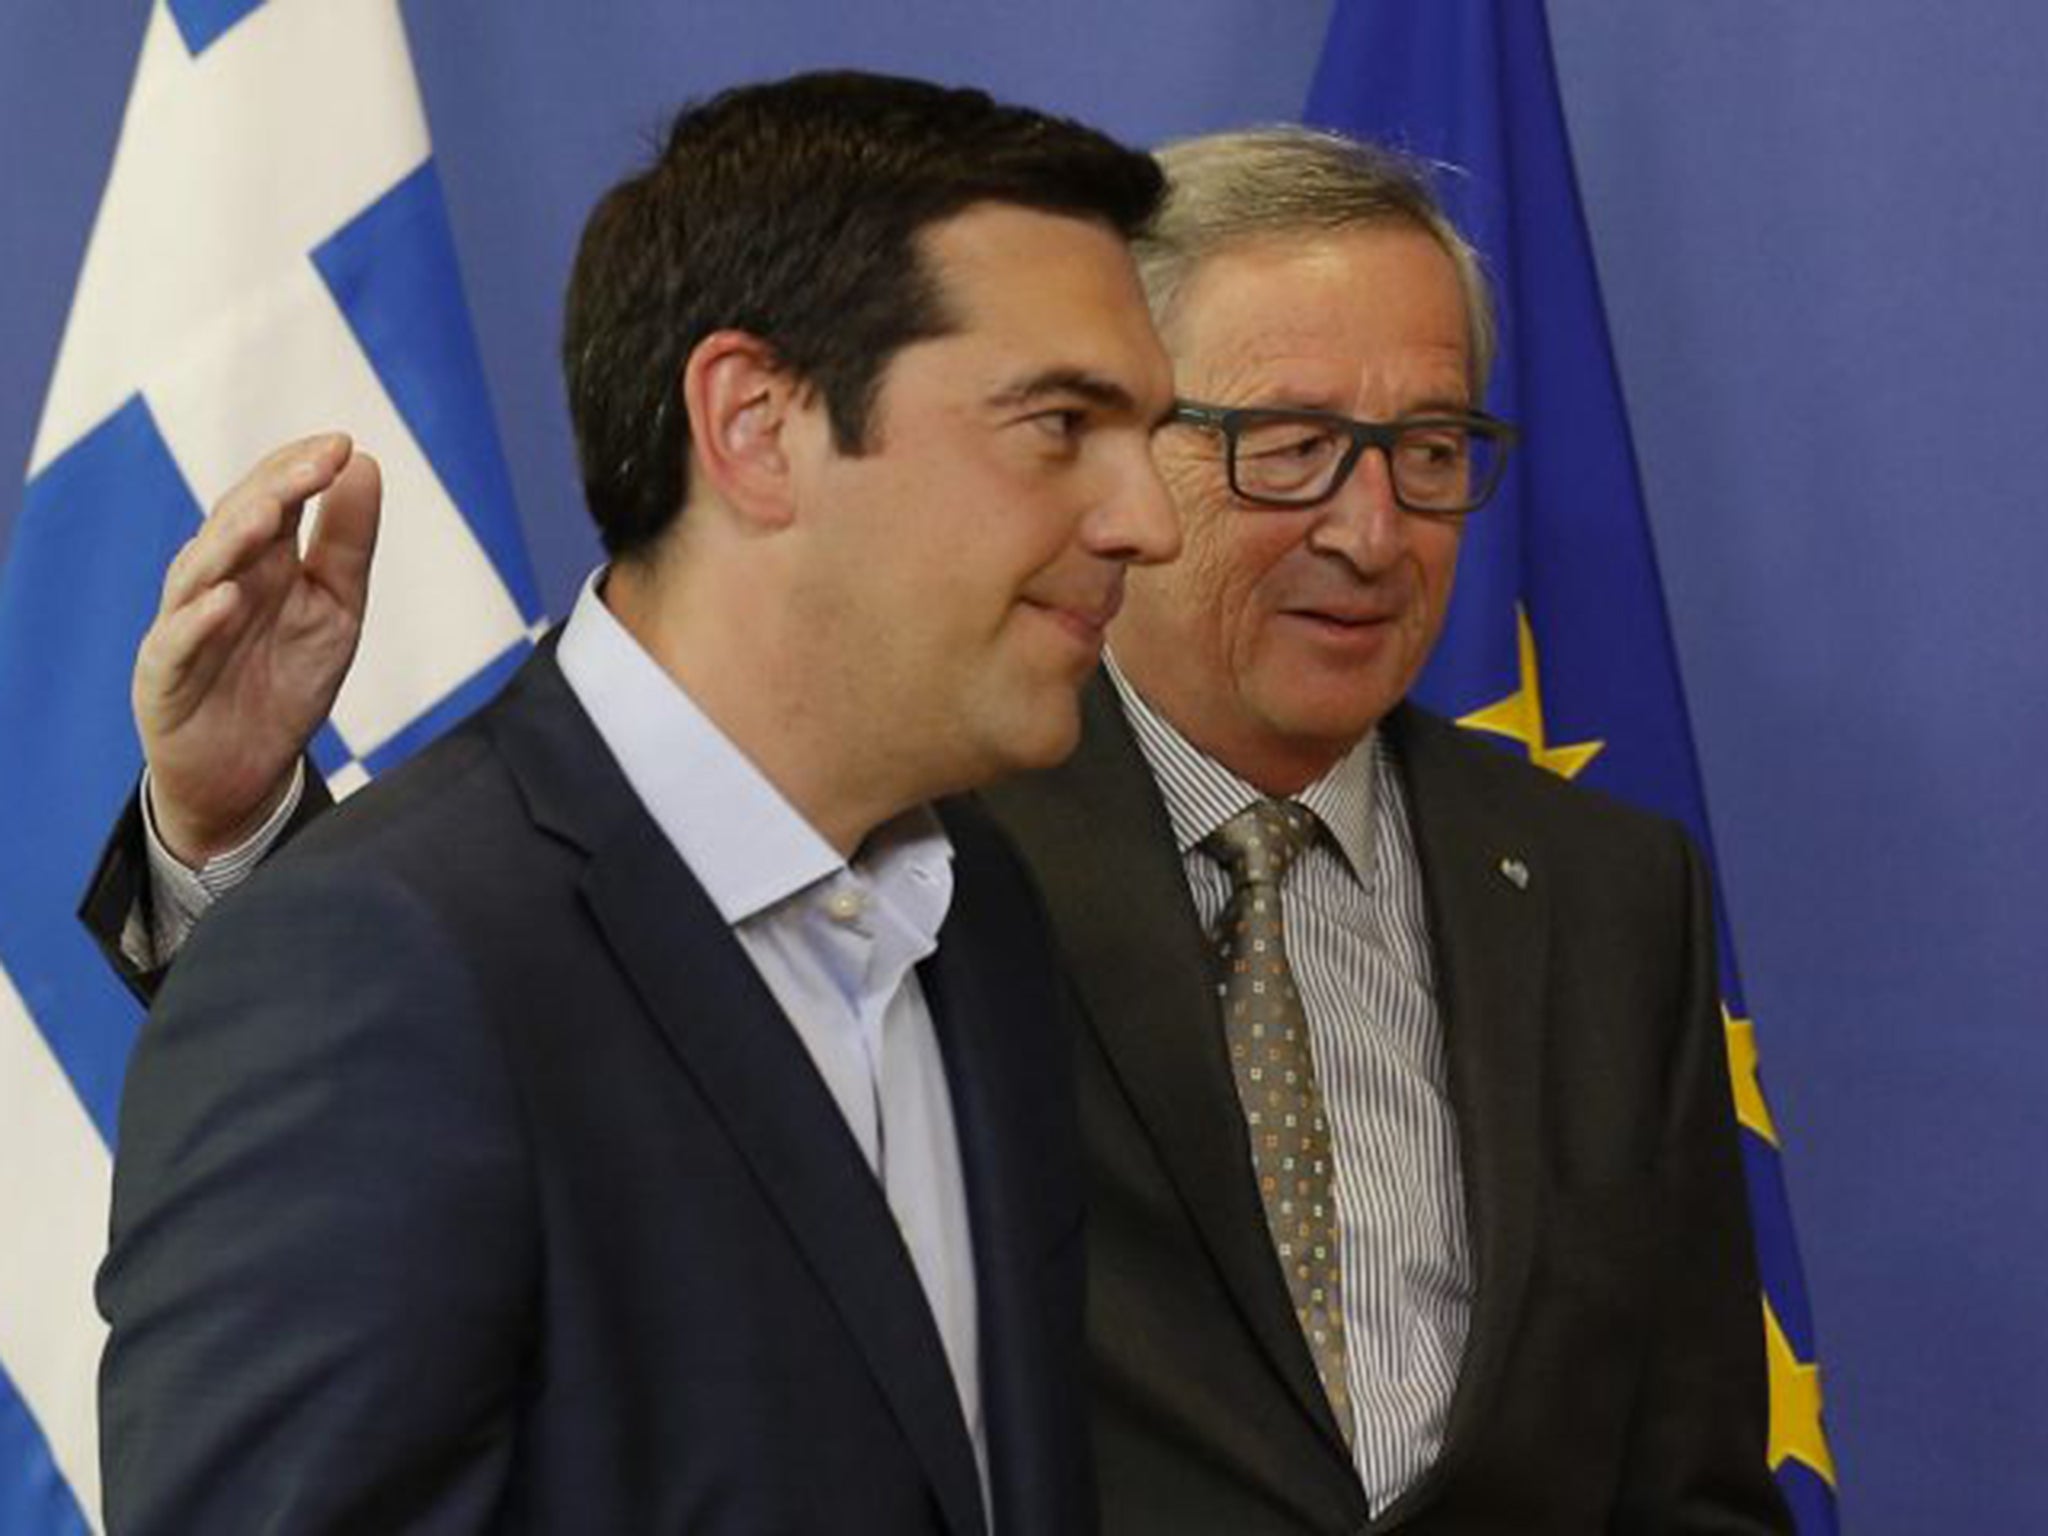 Alexis Tsipras and Jean-Claude Juncker, the head of the European Commission